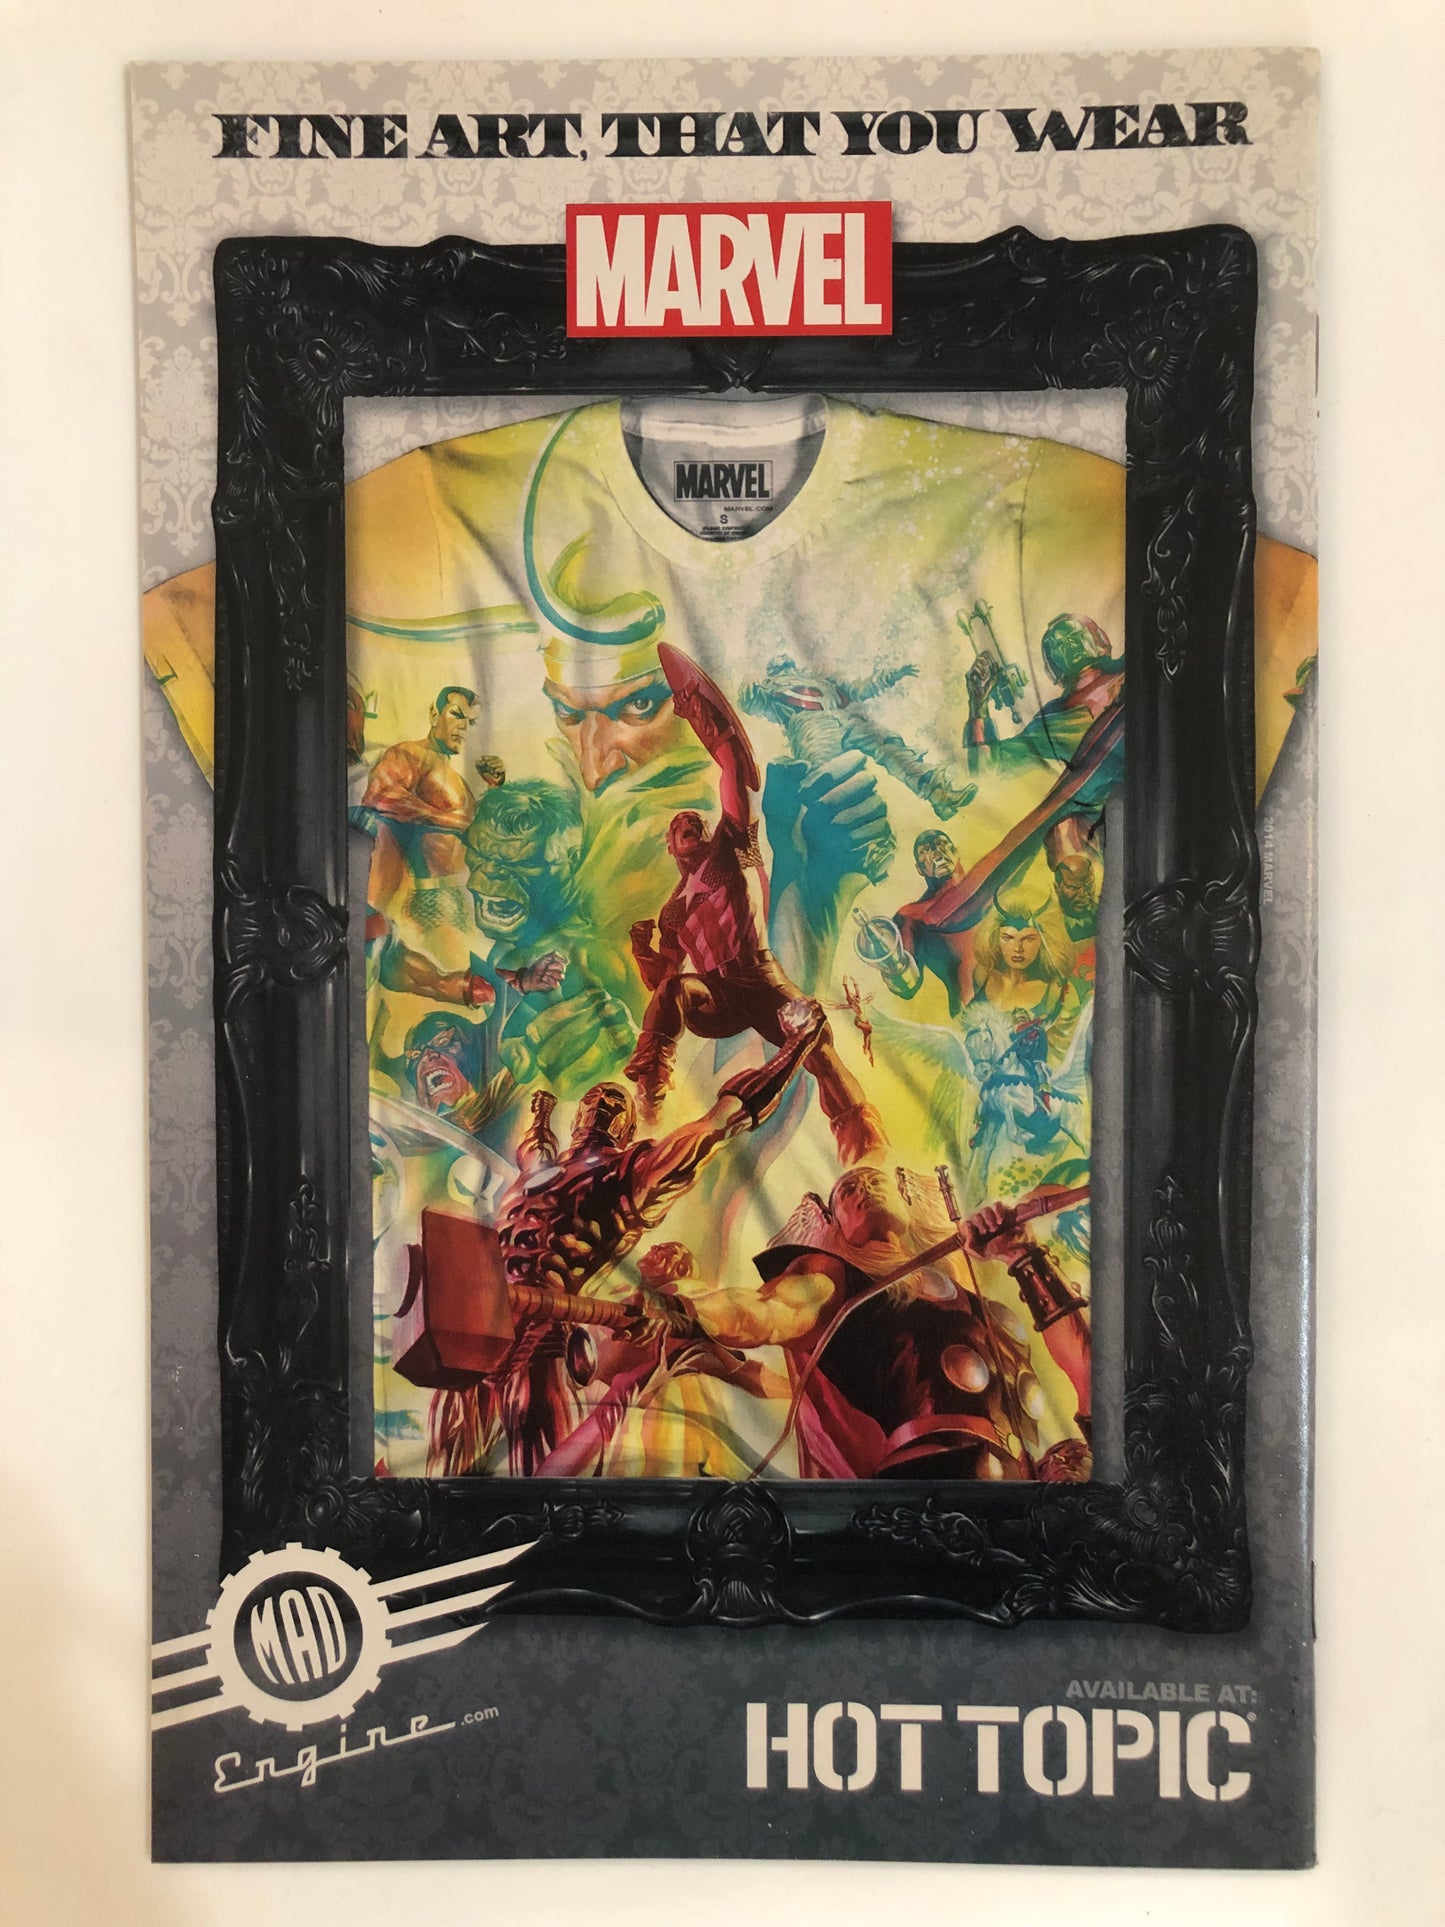 The Amazing Spider-Man #9 Rocket Raccoon And Groot Variant